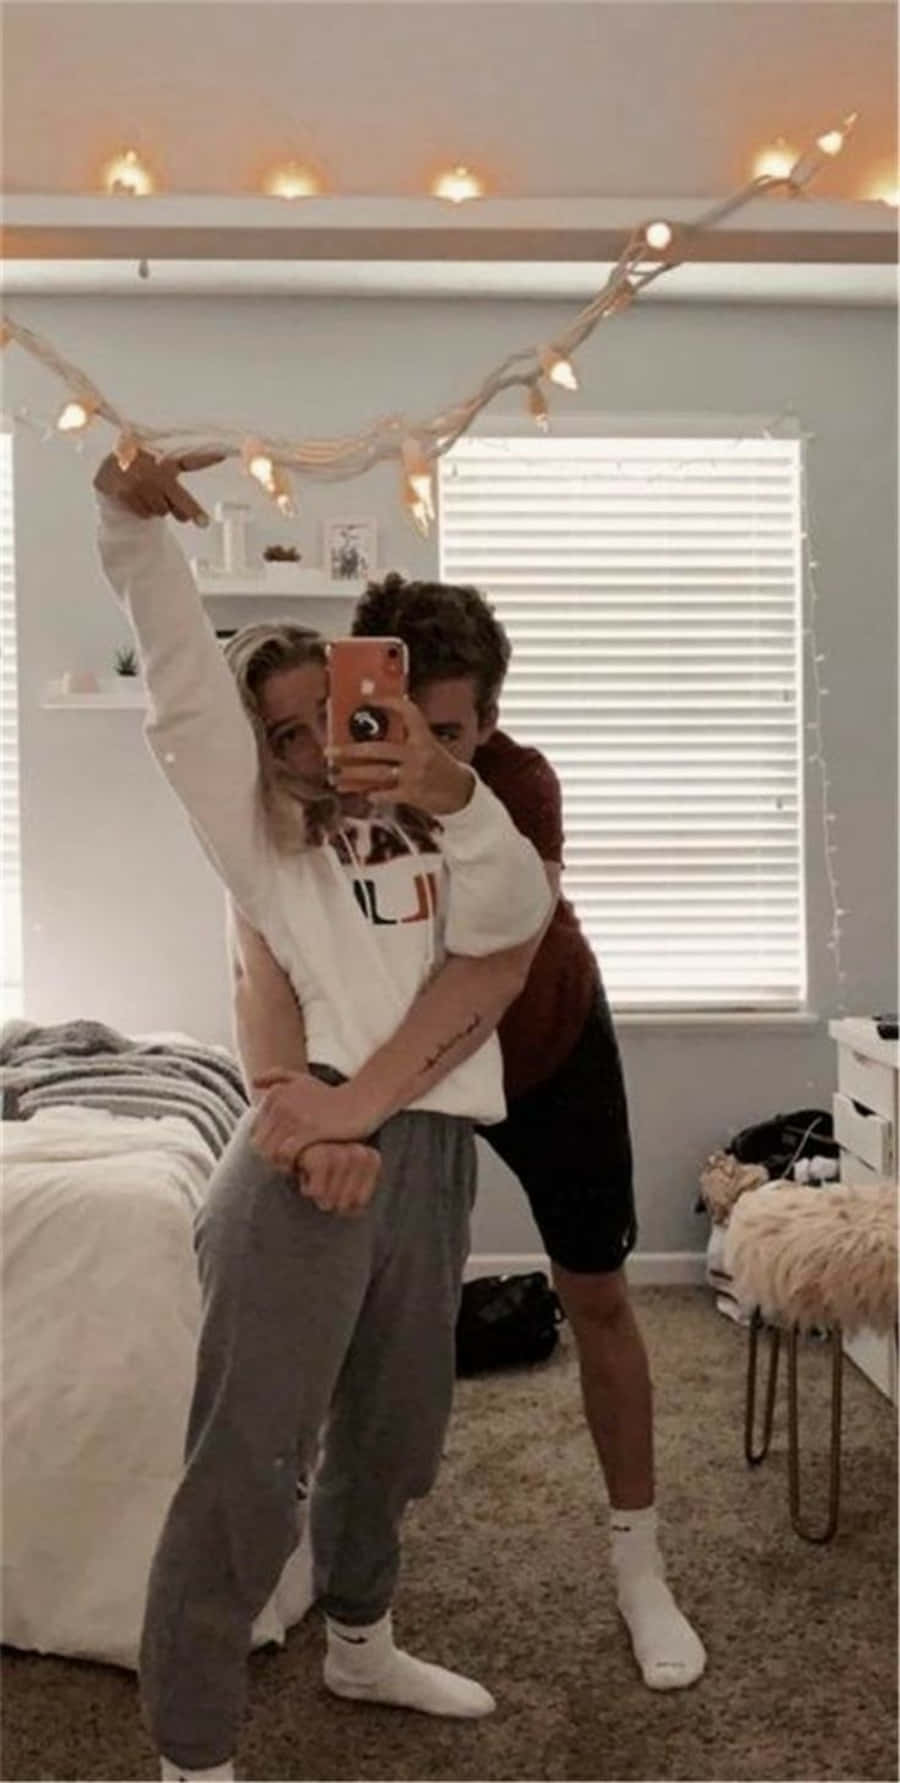 A Couple Taking A Selfie In Their Bedroom